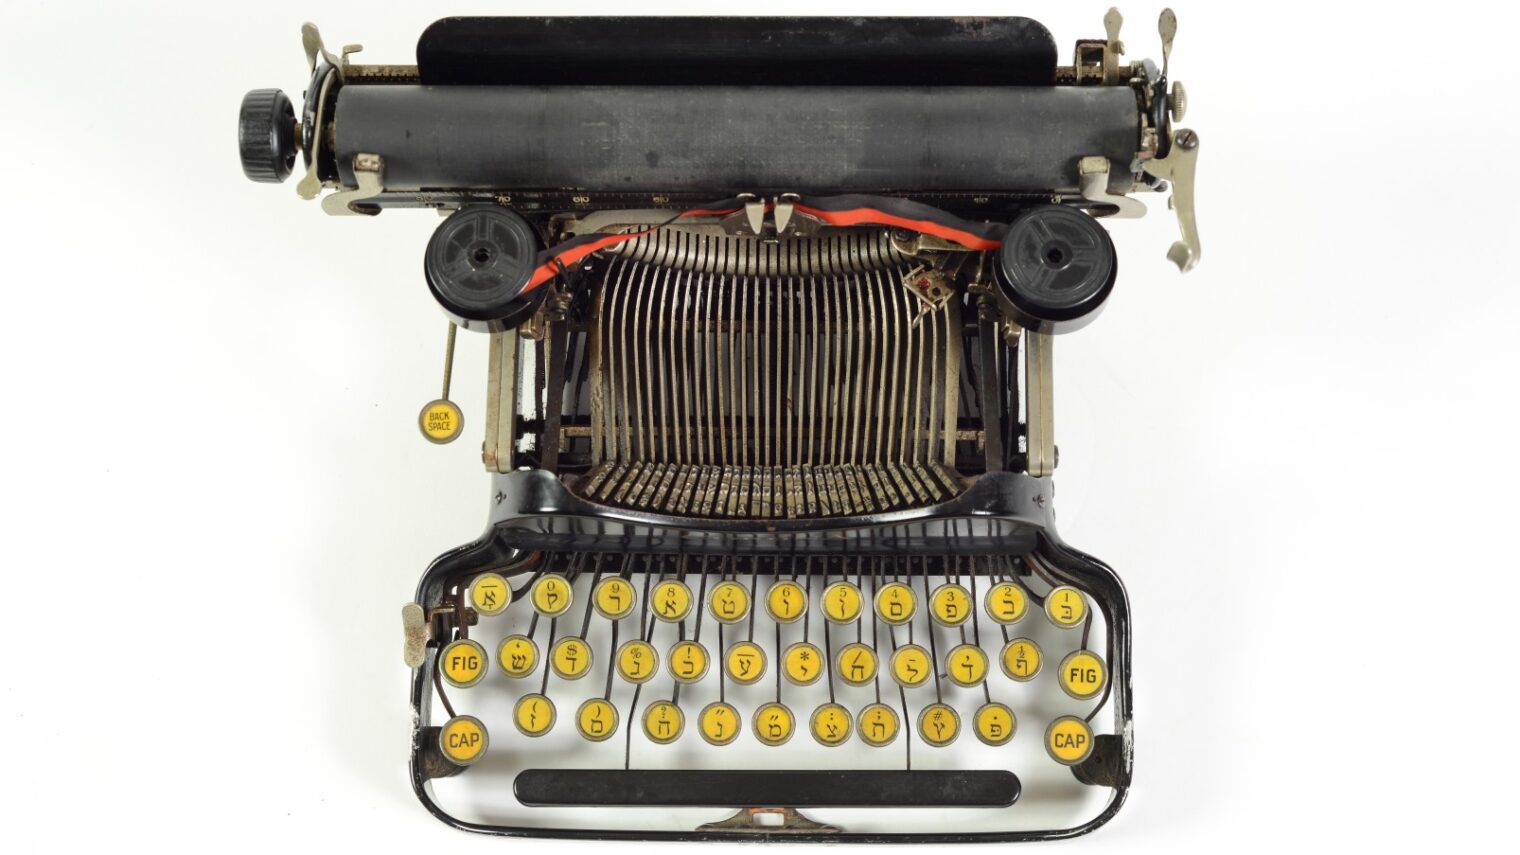 A 1912 Corona typewriter on loan from the Israel National Museum of Science, Technology, and Space-Madatech in Haifa, at â€œ70 Years Old: Treasures of Israel`s Museums.â€� Photo by Shai Ben Efraim